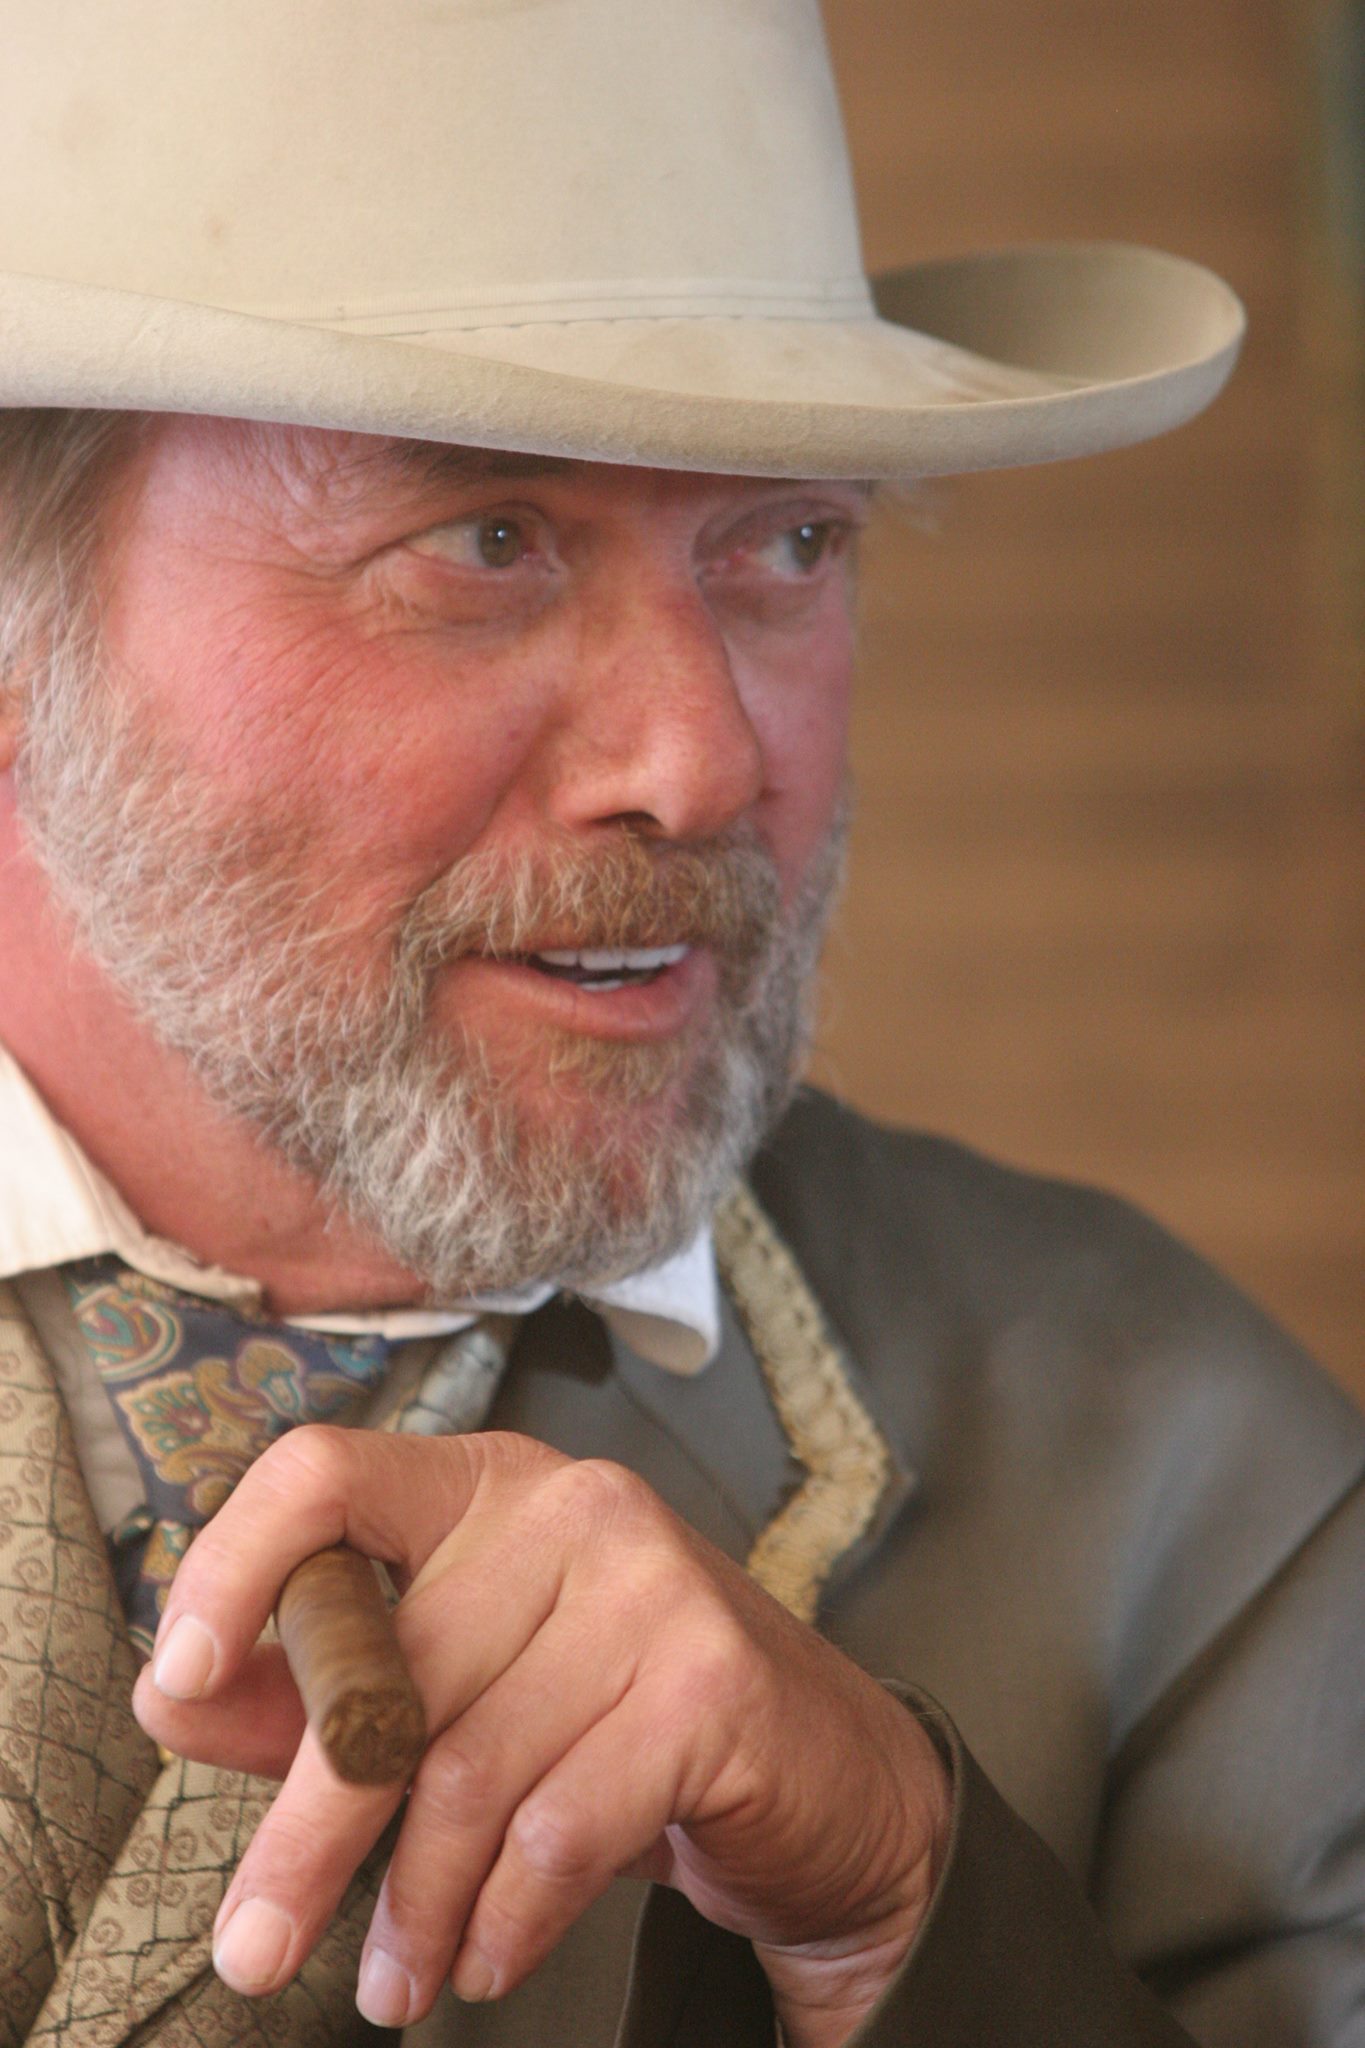 James as Harvard Gold in feature film 'Western Religion' 2015 directed by James O'Brien